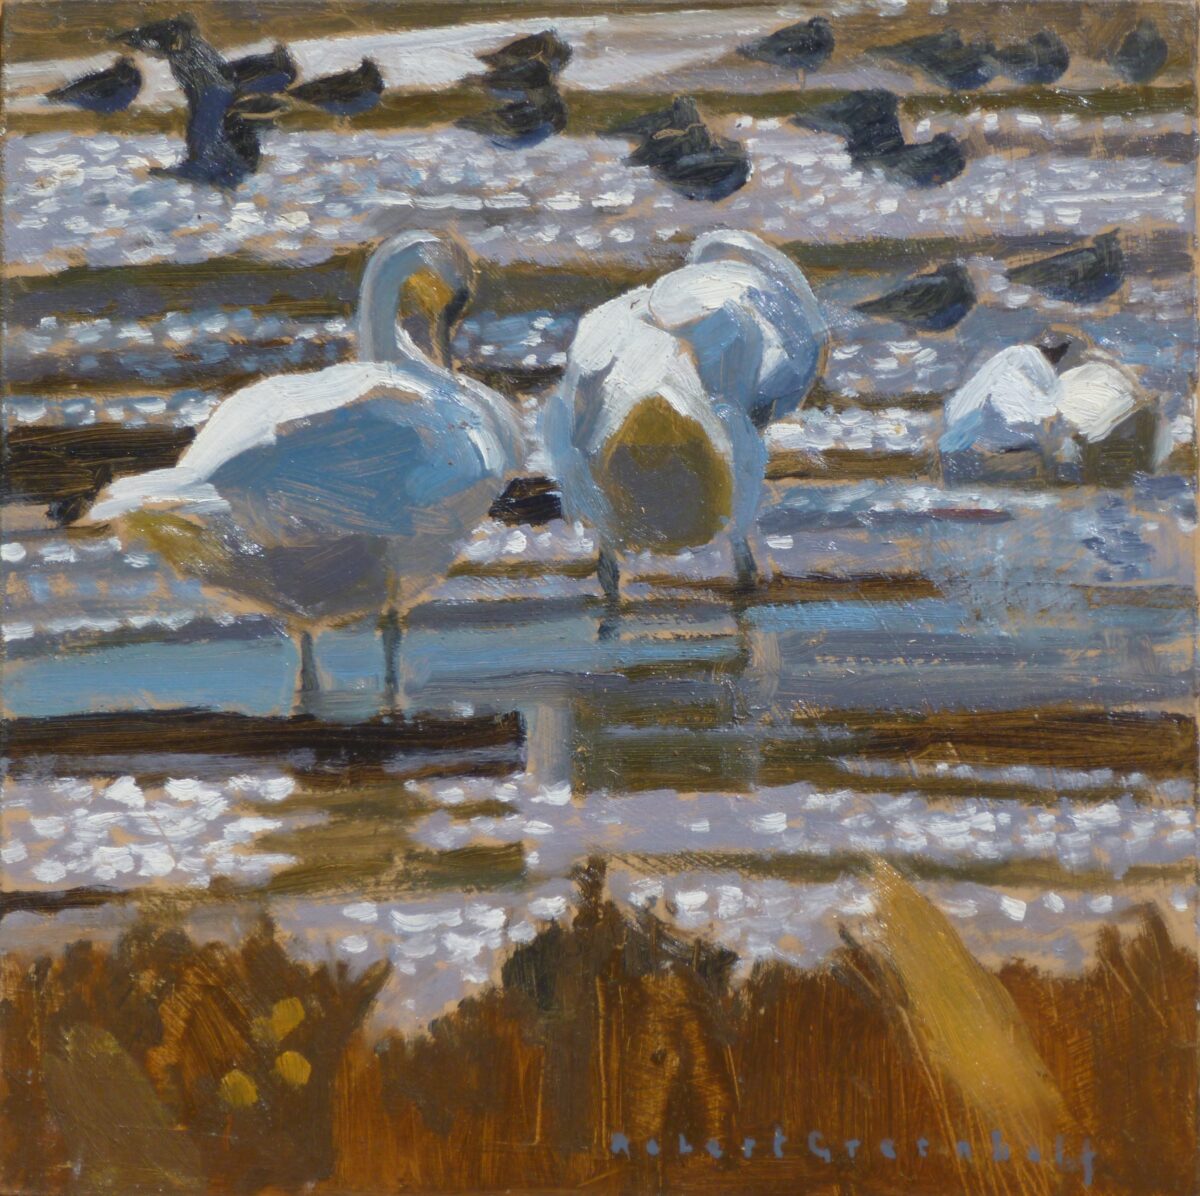 Artwork image titled: Mute Swans and Lapwings